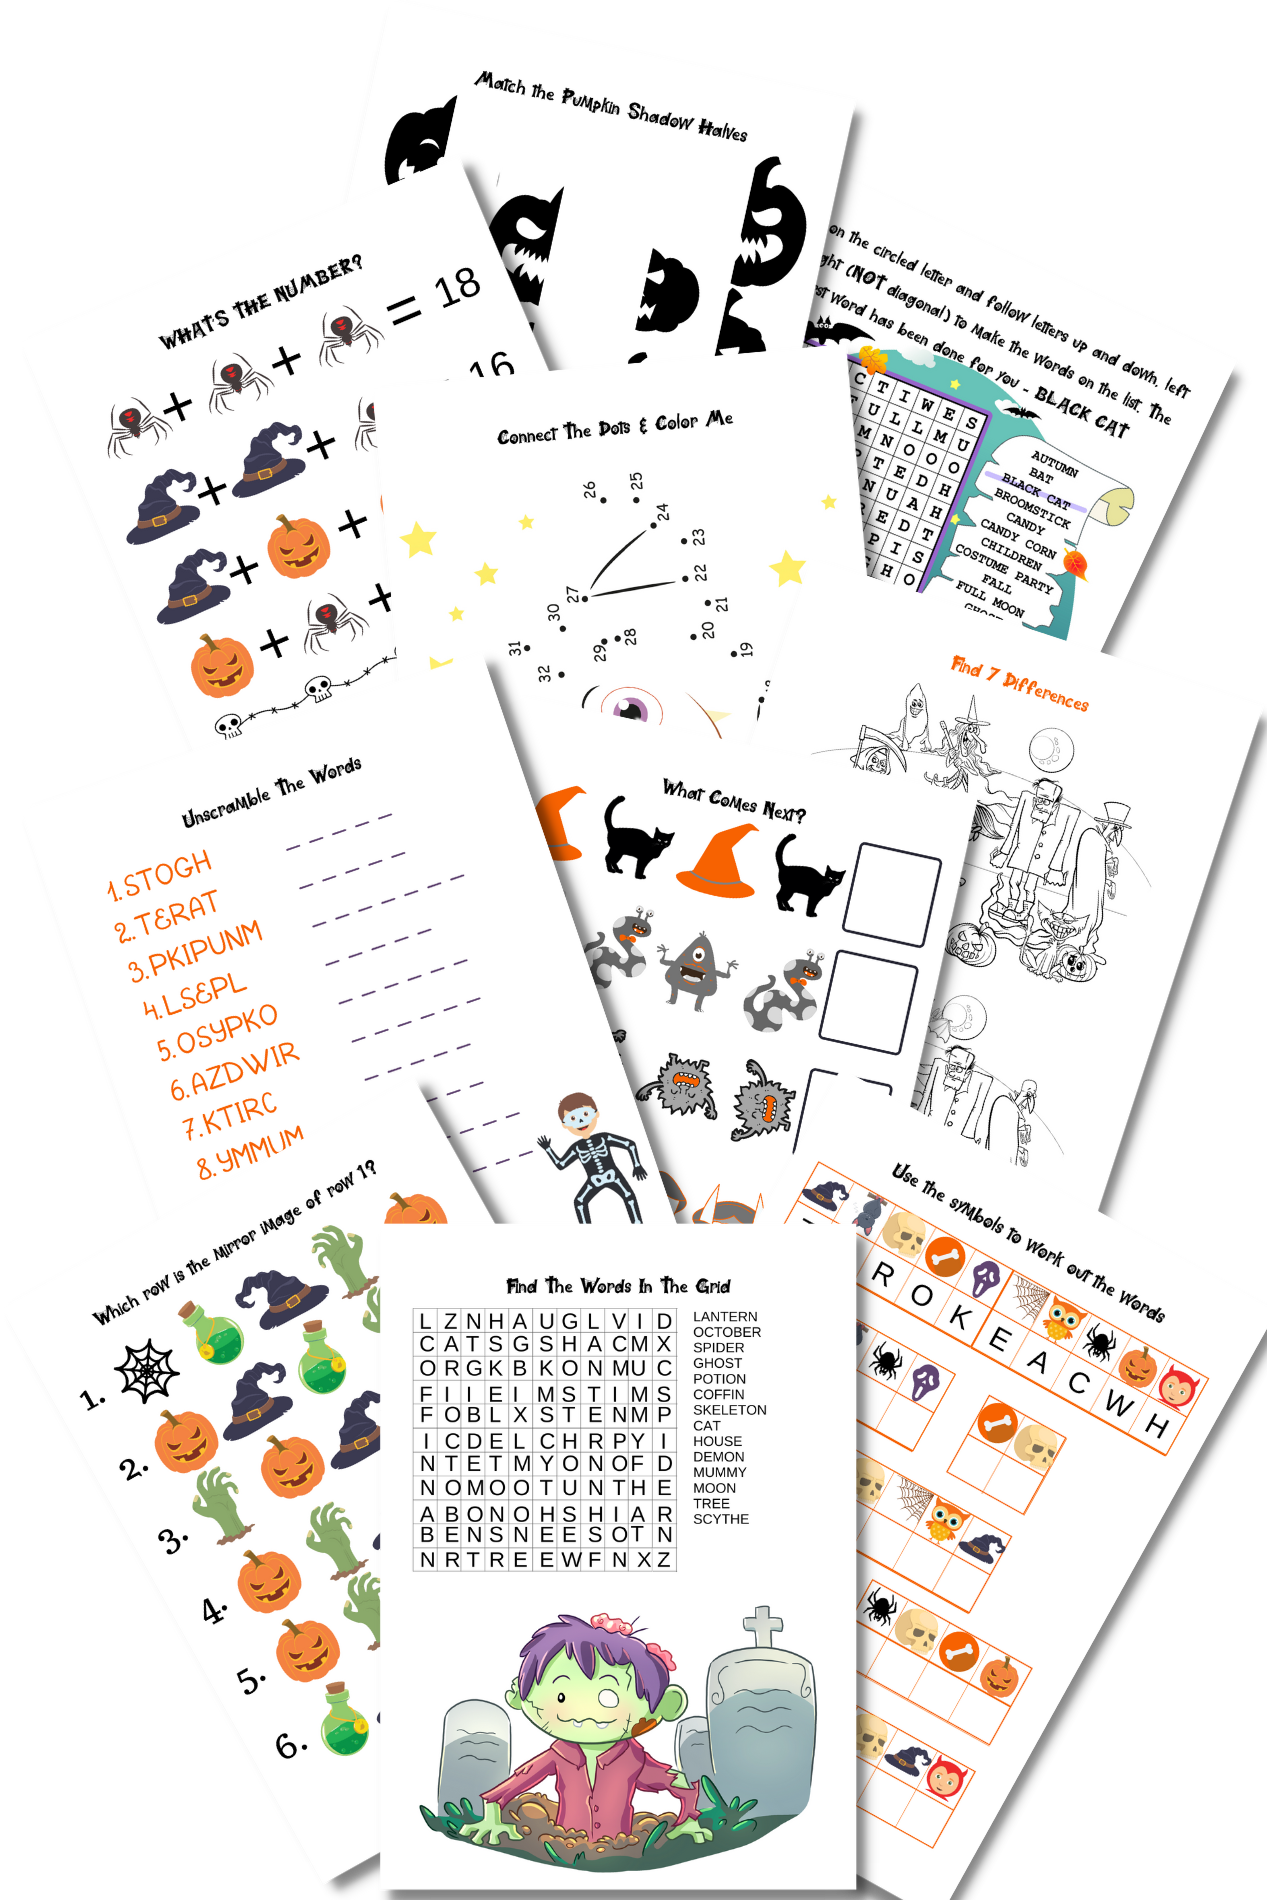 halloween-activity-worksheets-pack-2-non-screen-activities-for-kids-reviews-on-judge-me